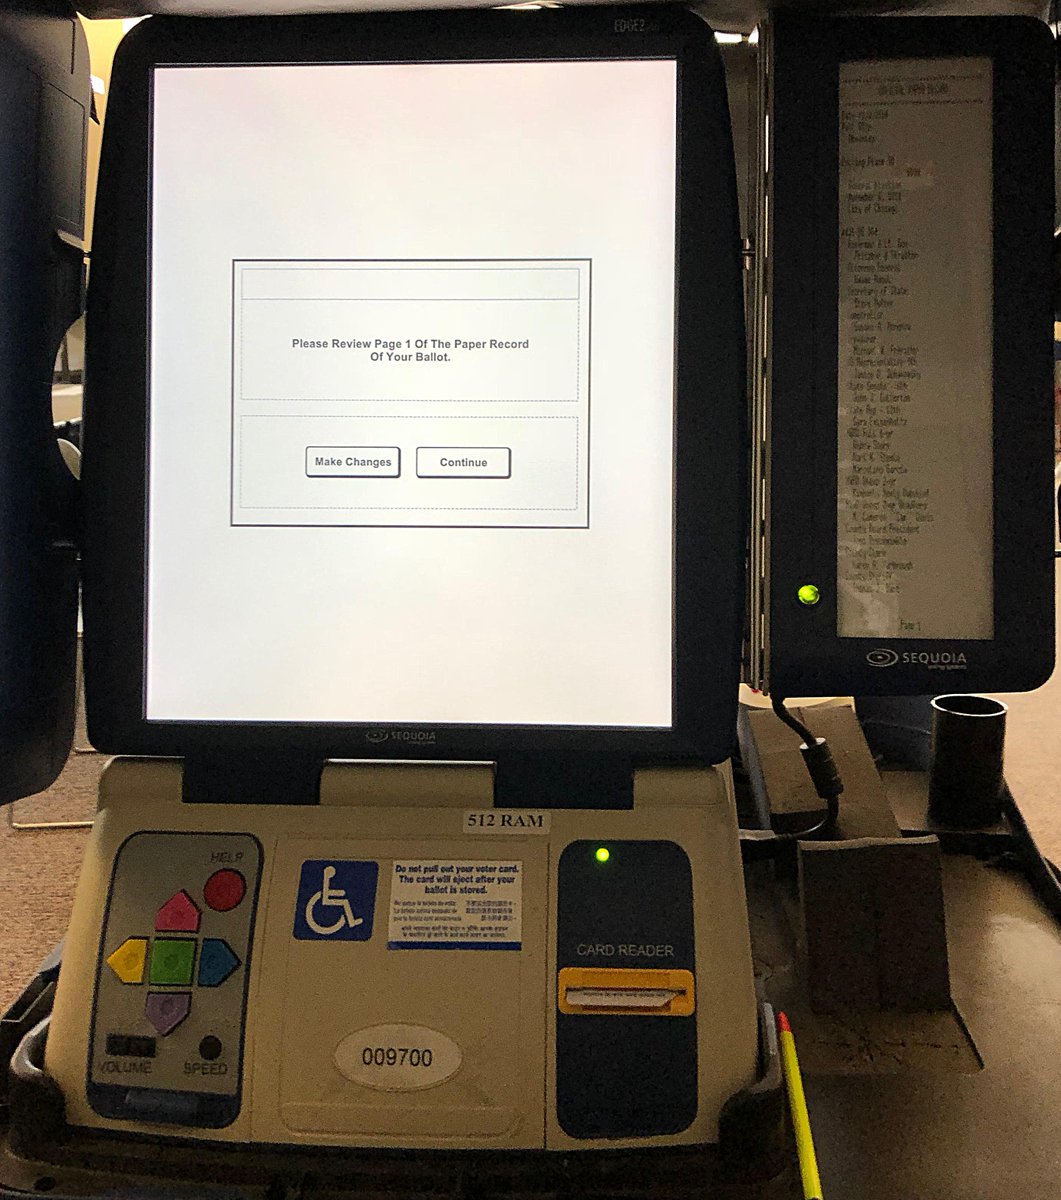 9/ There are four main components of the area's voting system. They include:The Edge2Plus, a Direct Recording Electronic (DRE) touchscreen voting machine that produces an electronic ballot with a paper ballot recorded as a side scroll inside the machine.